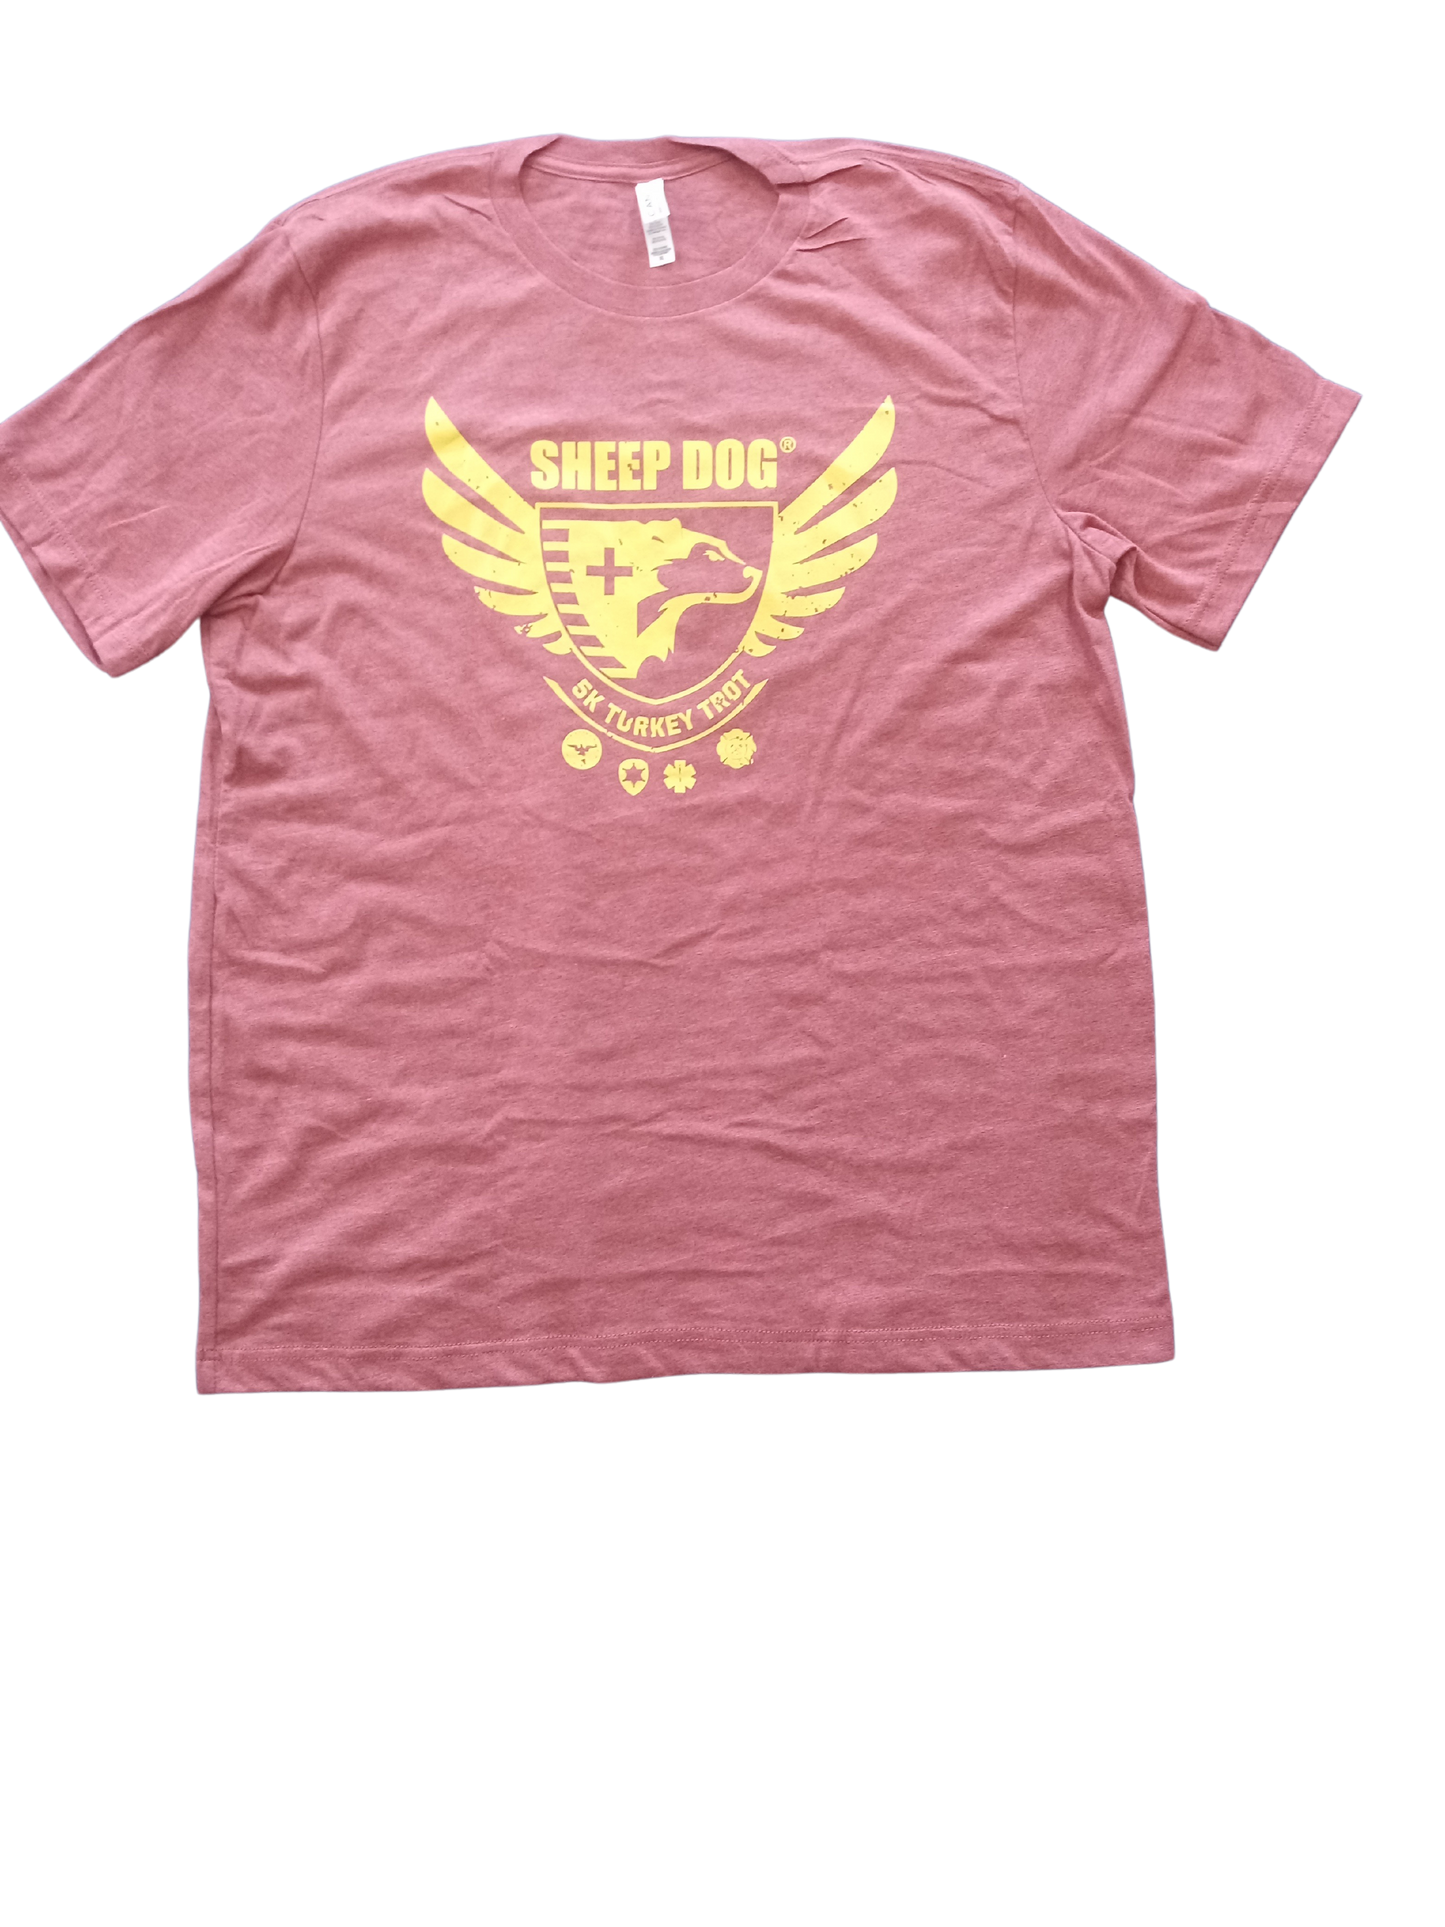 Turkey Trot for Heroes Event Shirt